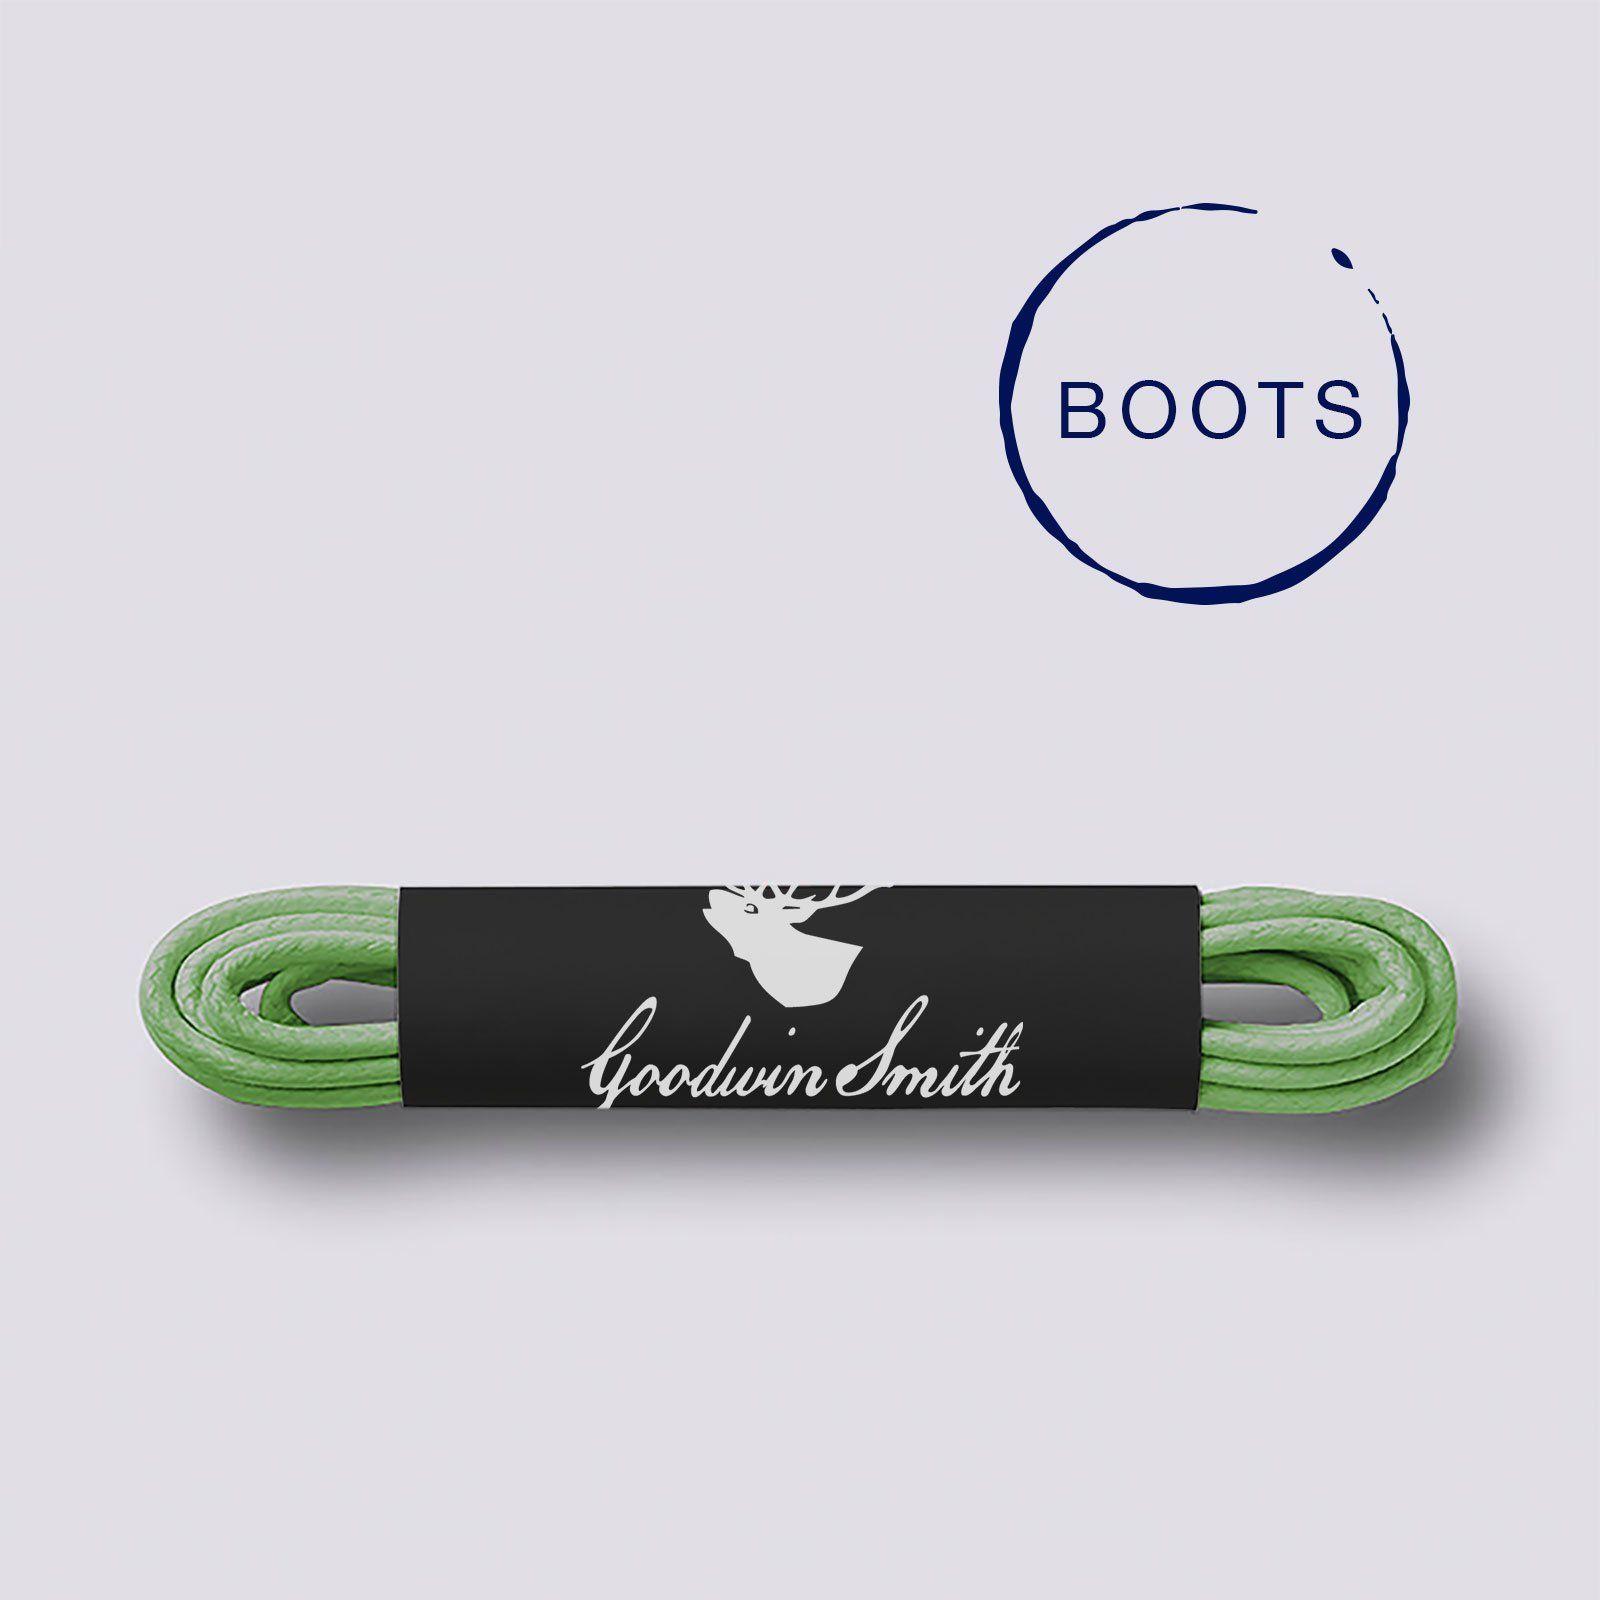 Green Boots Logo - Light Green Boot Laces